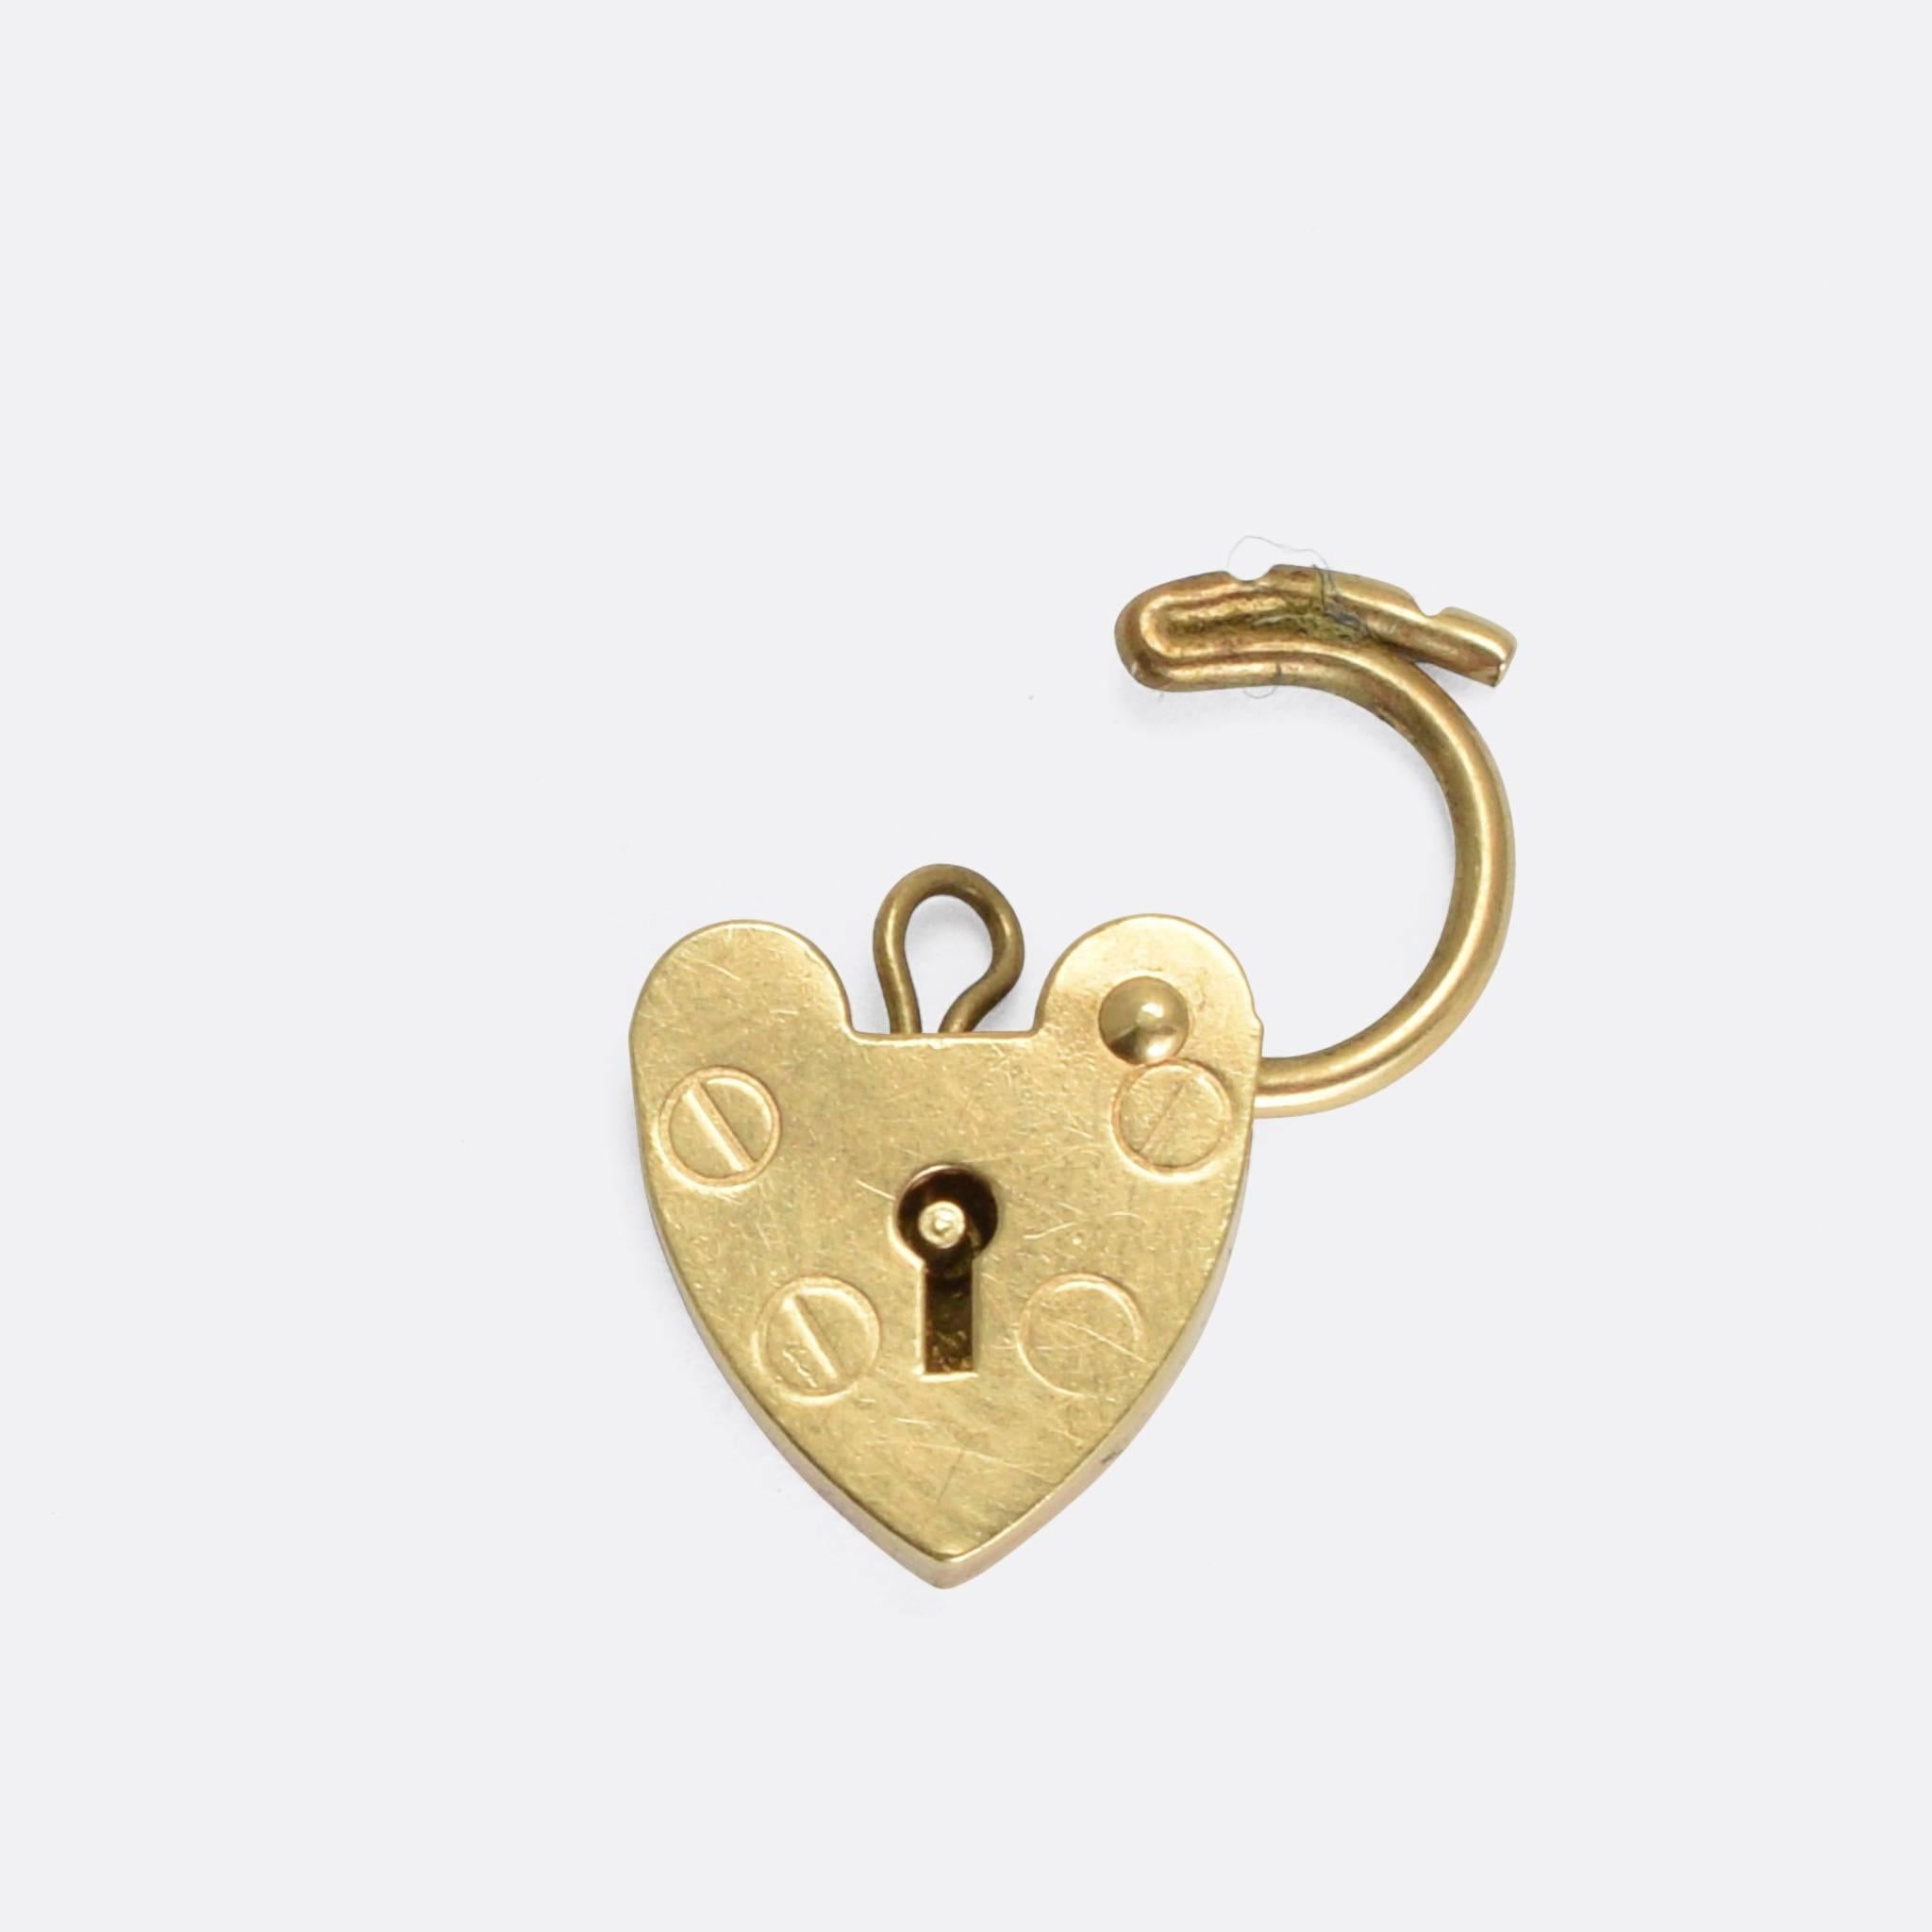 A sweet little heart padlock modelled in 9 karat yellow gold. It dates to the 1980s, with clear London hallmarks and the maker's mark ASJ. The top opens up, allowing easy attachment to a necklace chain or charm holder.

MEASUREMENTS
13.1 x